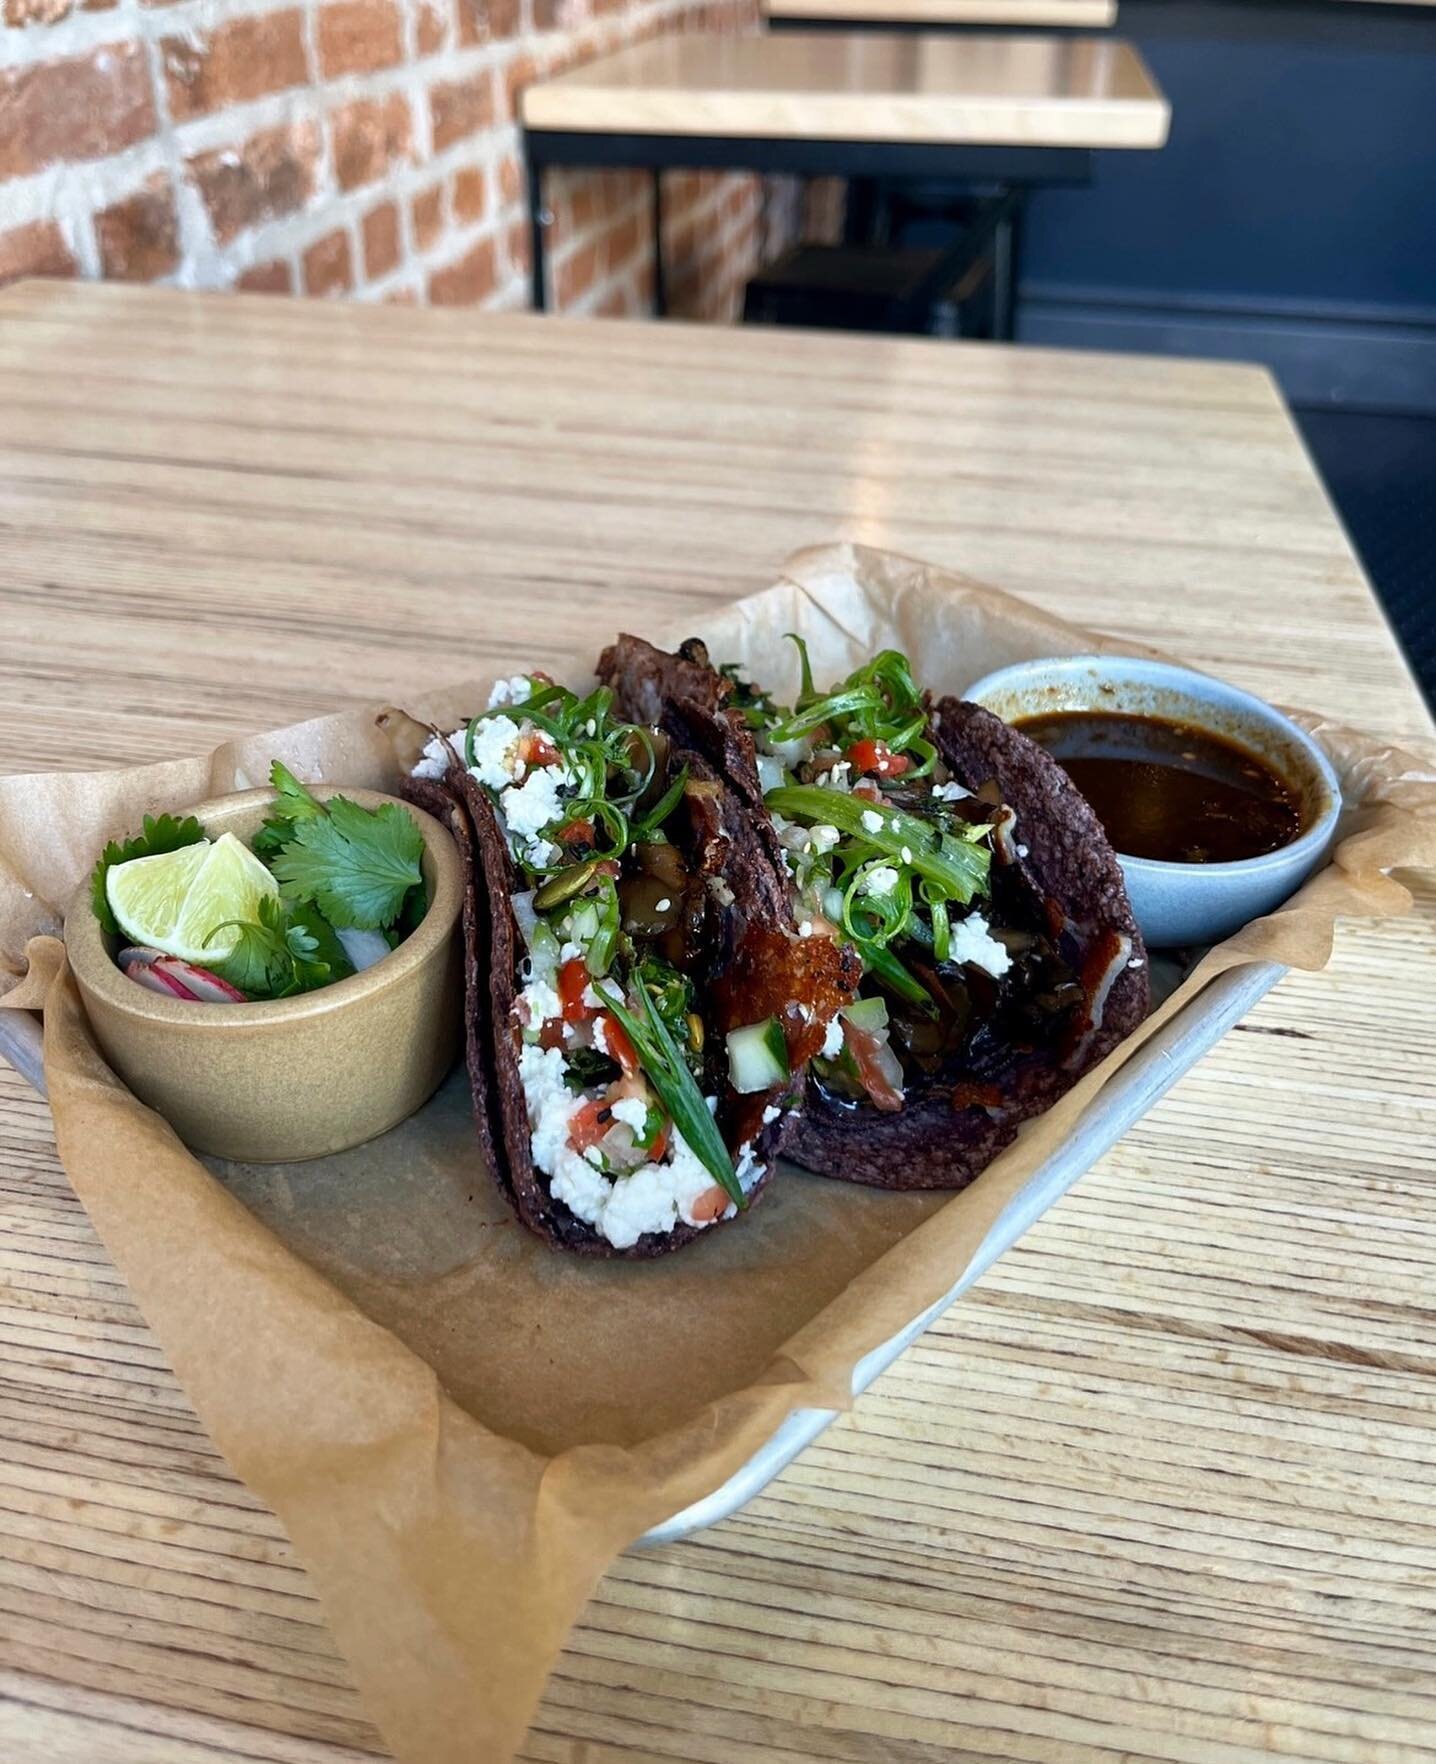 Chef Matt &amp; the team have been making some awesome changes to the menu along with the change in season! Here we have our Maitake Mushroom tacos served with a mushroom birria sauce. Book with resy for tonight! 
Open from 12-11 
Happy hour from 3-5